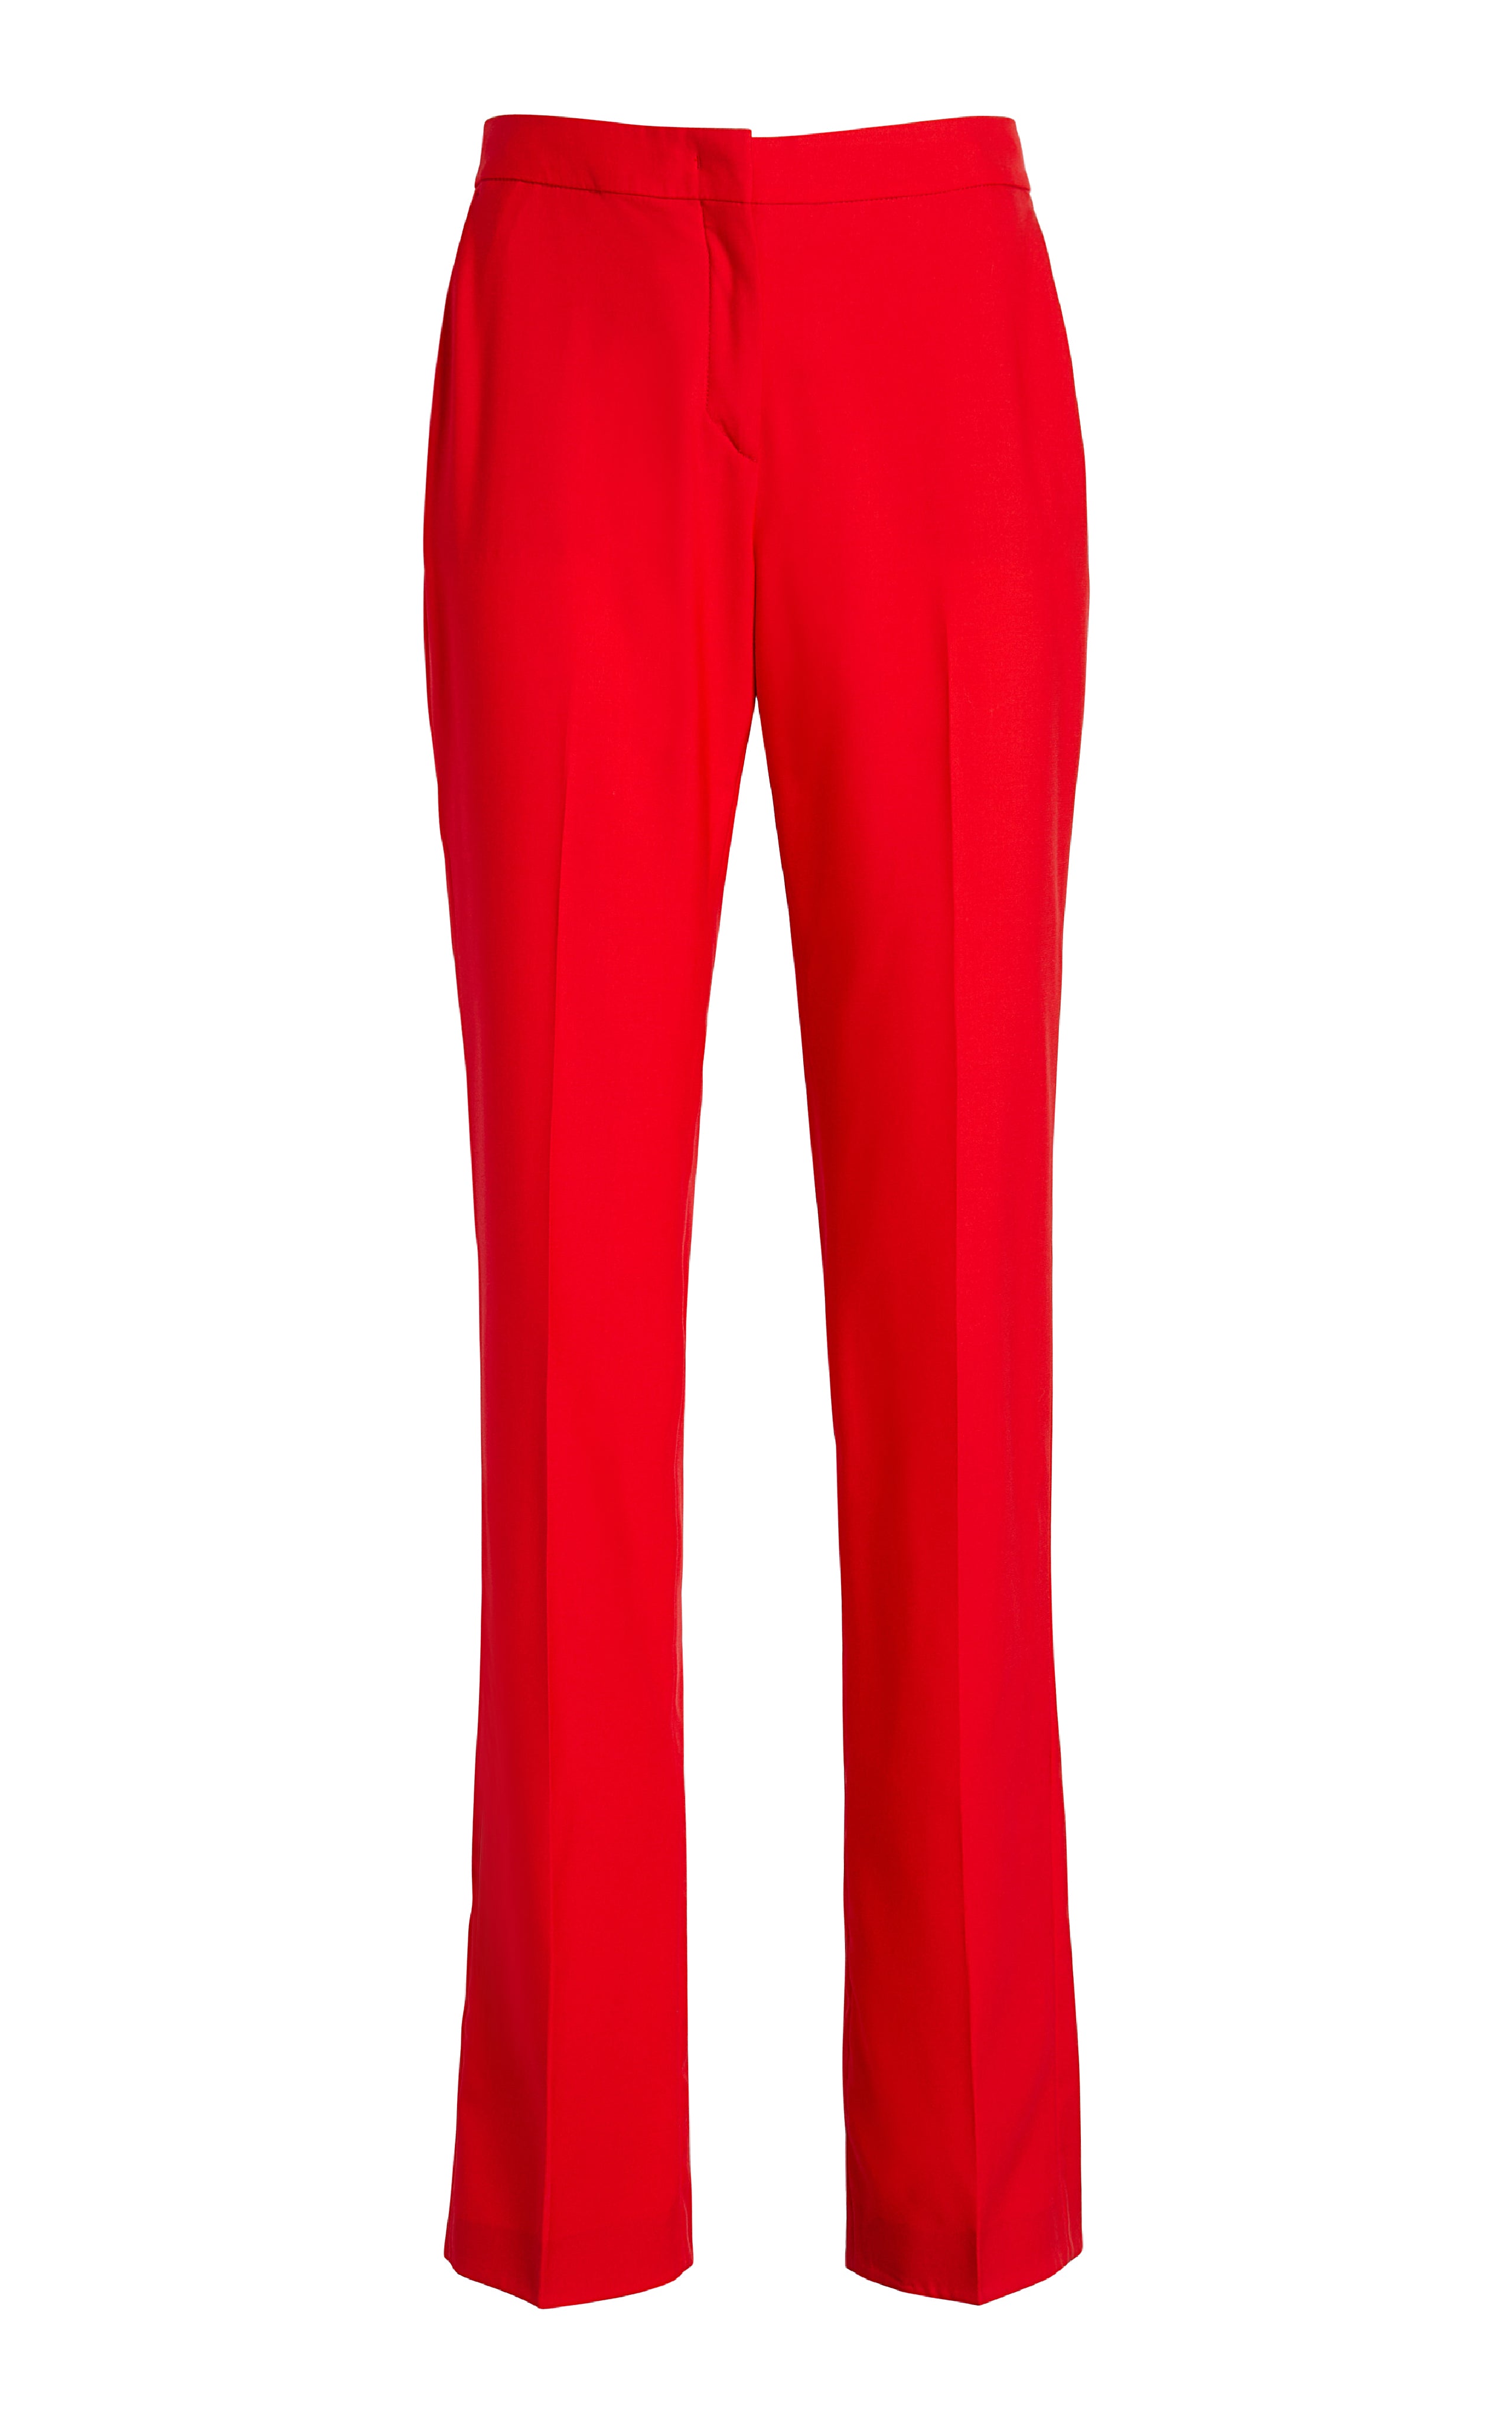 fcity.in - Greciilooks Women Solid Bell Bottoms Red Trousers Pants /